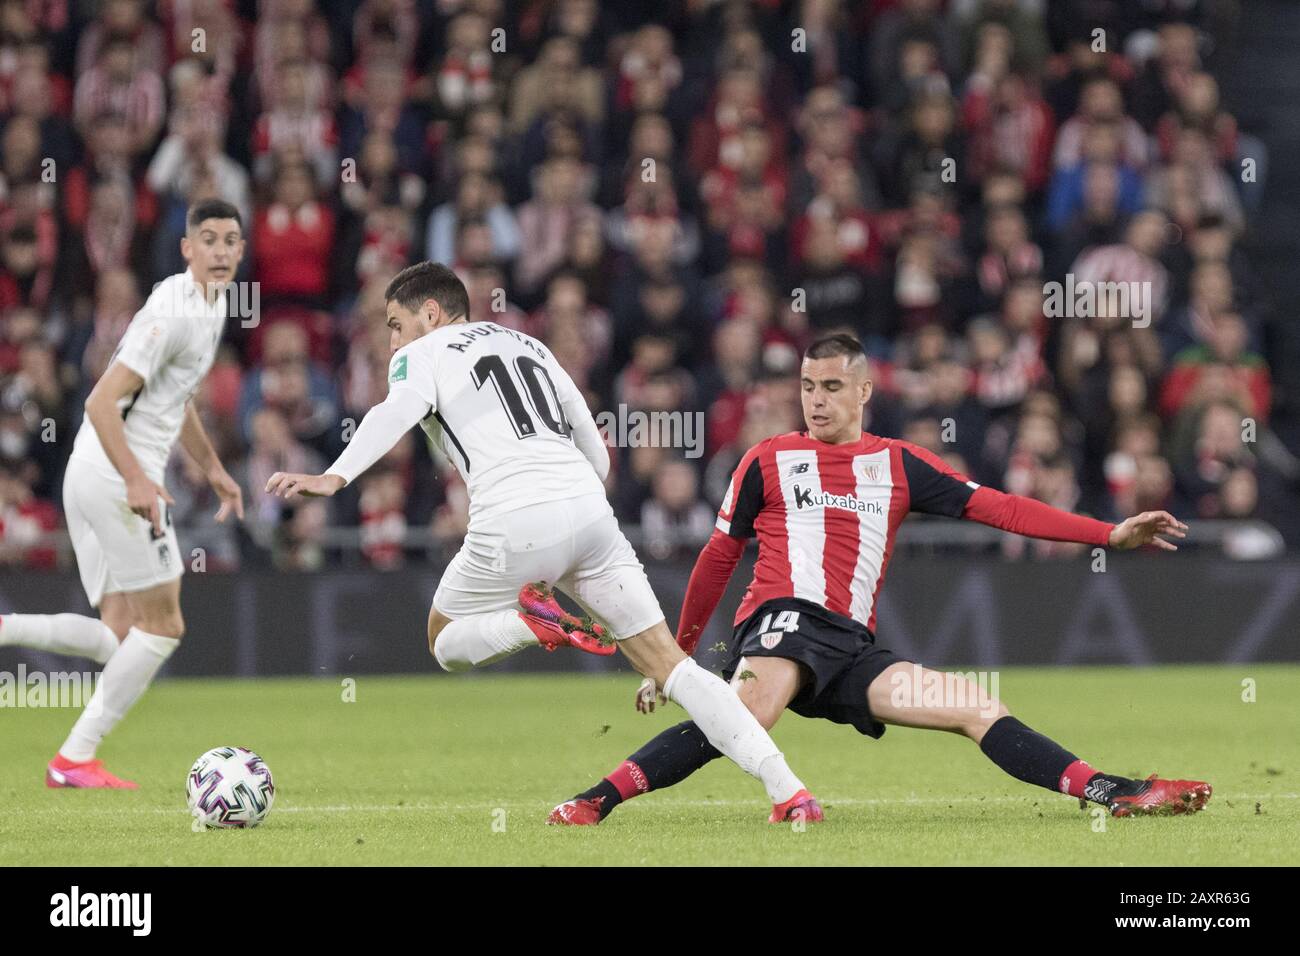 Bilbao, Bizkaia, SPAIN. 12th Feb, 2020. DANI GARCIA (14) tries to win the ball with a dive during the game between Athletic Club and Granada. Athletic Club de Bilbao hosted Granada CF in the going match of the Copa del Rey semifinal at San Mamés stadium.With this victory, Athletic Club faces a good return game at Los CÃrmenes stadium, which will take place on March 4th. Credit: Edu Del Fresno/ZUMA Wire/Alamy Live News Stock Photo